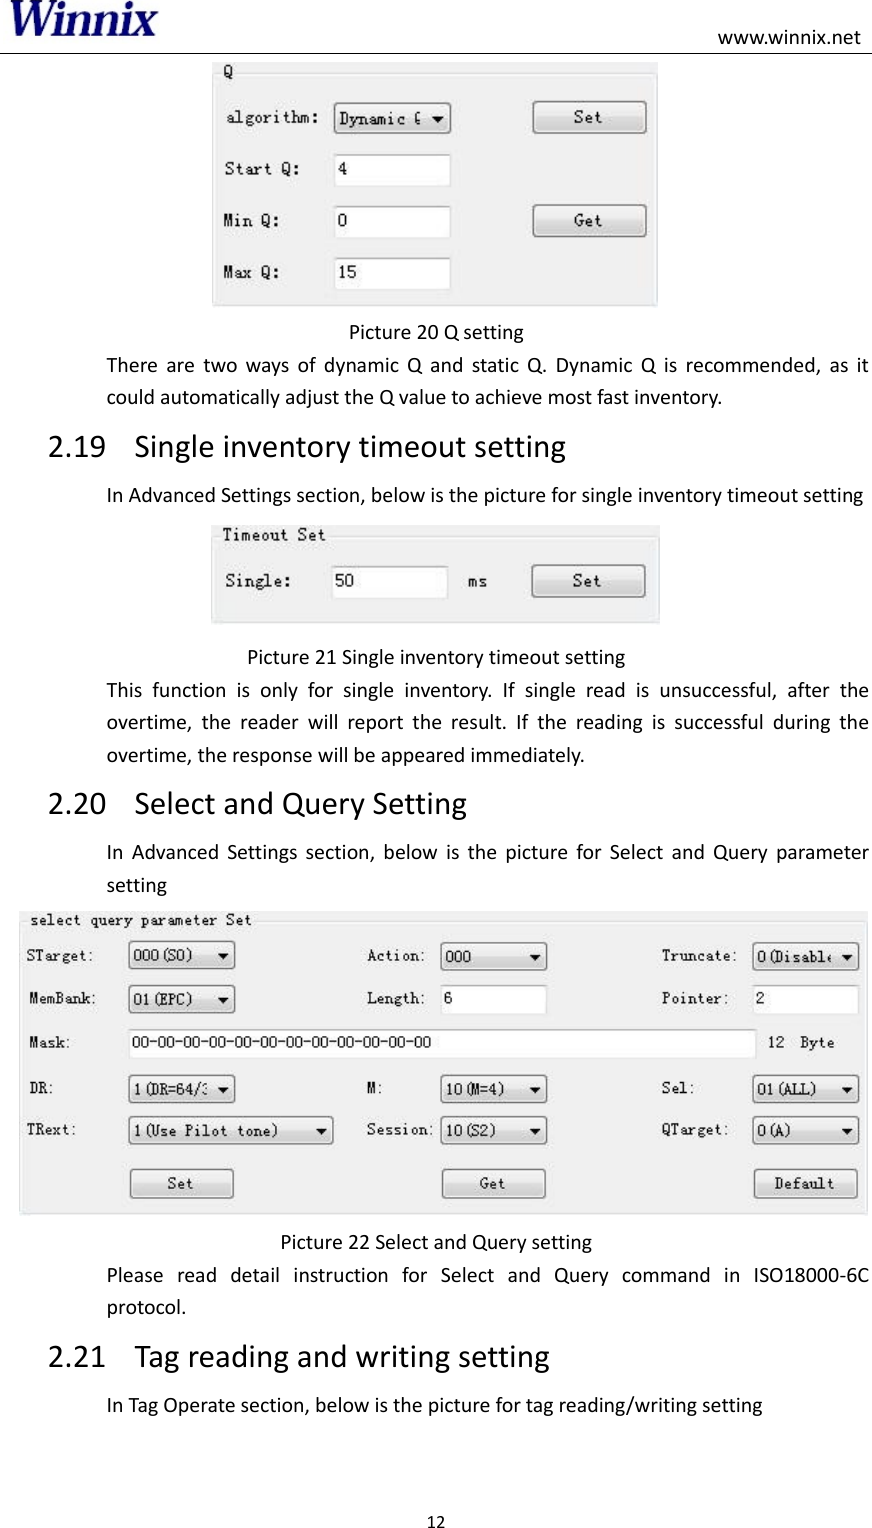                                                                                                    www.winnix.net 12   Picture 20 Q setting There  are  two  ways  of  dynamic  Q  and  static  Q.  Dynamic  Q  is  recommended,  as  it could automatically adjust the Q value to achieve most fast inventory. 2.19 Single inventory timeout setting In Advanced Settings section, below is the picture for single inventory timeout setting  Picture 21 Single inventory timeout setting This  function  is  only  for  single  inventory.  If  single  read  is  unsuccessful,  after  the overtime,  the  reader  will  report  the  result.  If  the  reading  is  successful  during  the overtime, the response will be appeared immediately. 2.20 Select and Query Setting In  Advanced  Settings  section,  below  is  the  picture  for  Select  and  Query  parameter setting  Picture 22 Select and Query setting Please  read  detail  instruction  for  Select  and  Query  command  in  ISO18000-6C protocol. 2.21 Tag reading and writing setting In Tag Operate section, below is the picture for tag reading/writing setting 